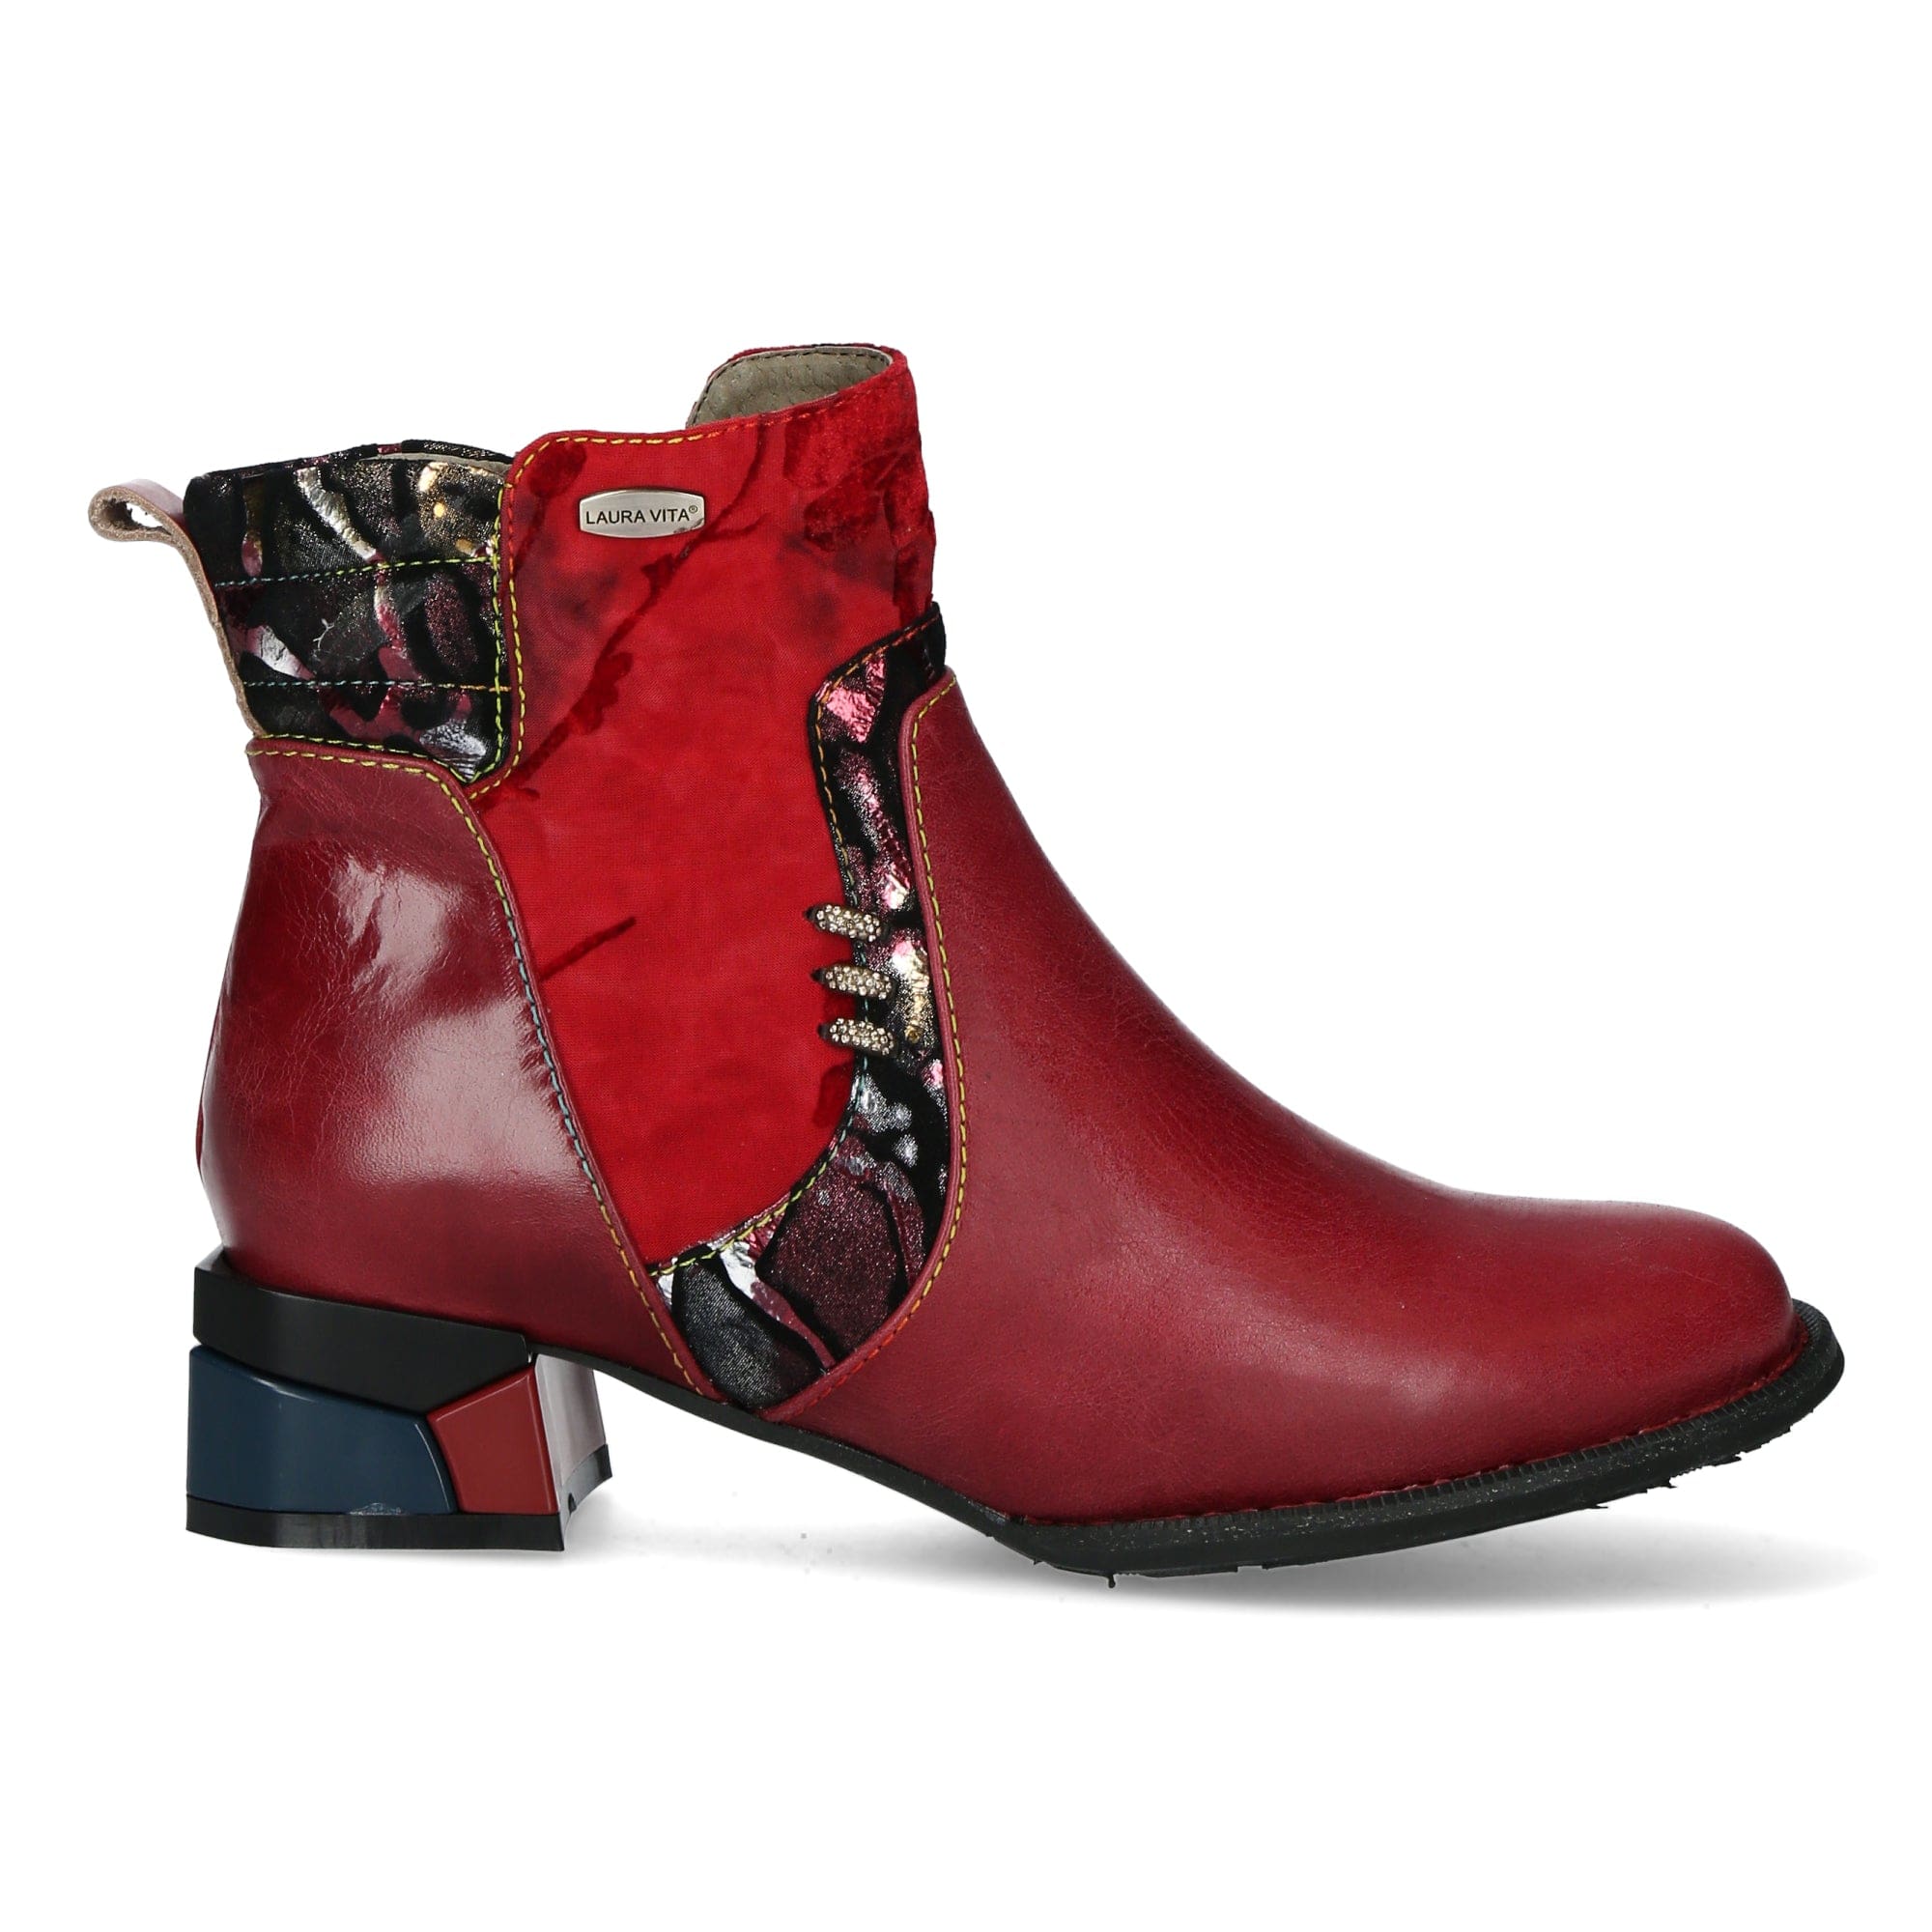 Schuh IGCOO 25 - 35 / Rot - Stiefeletten